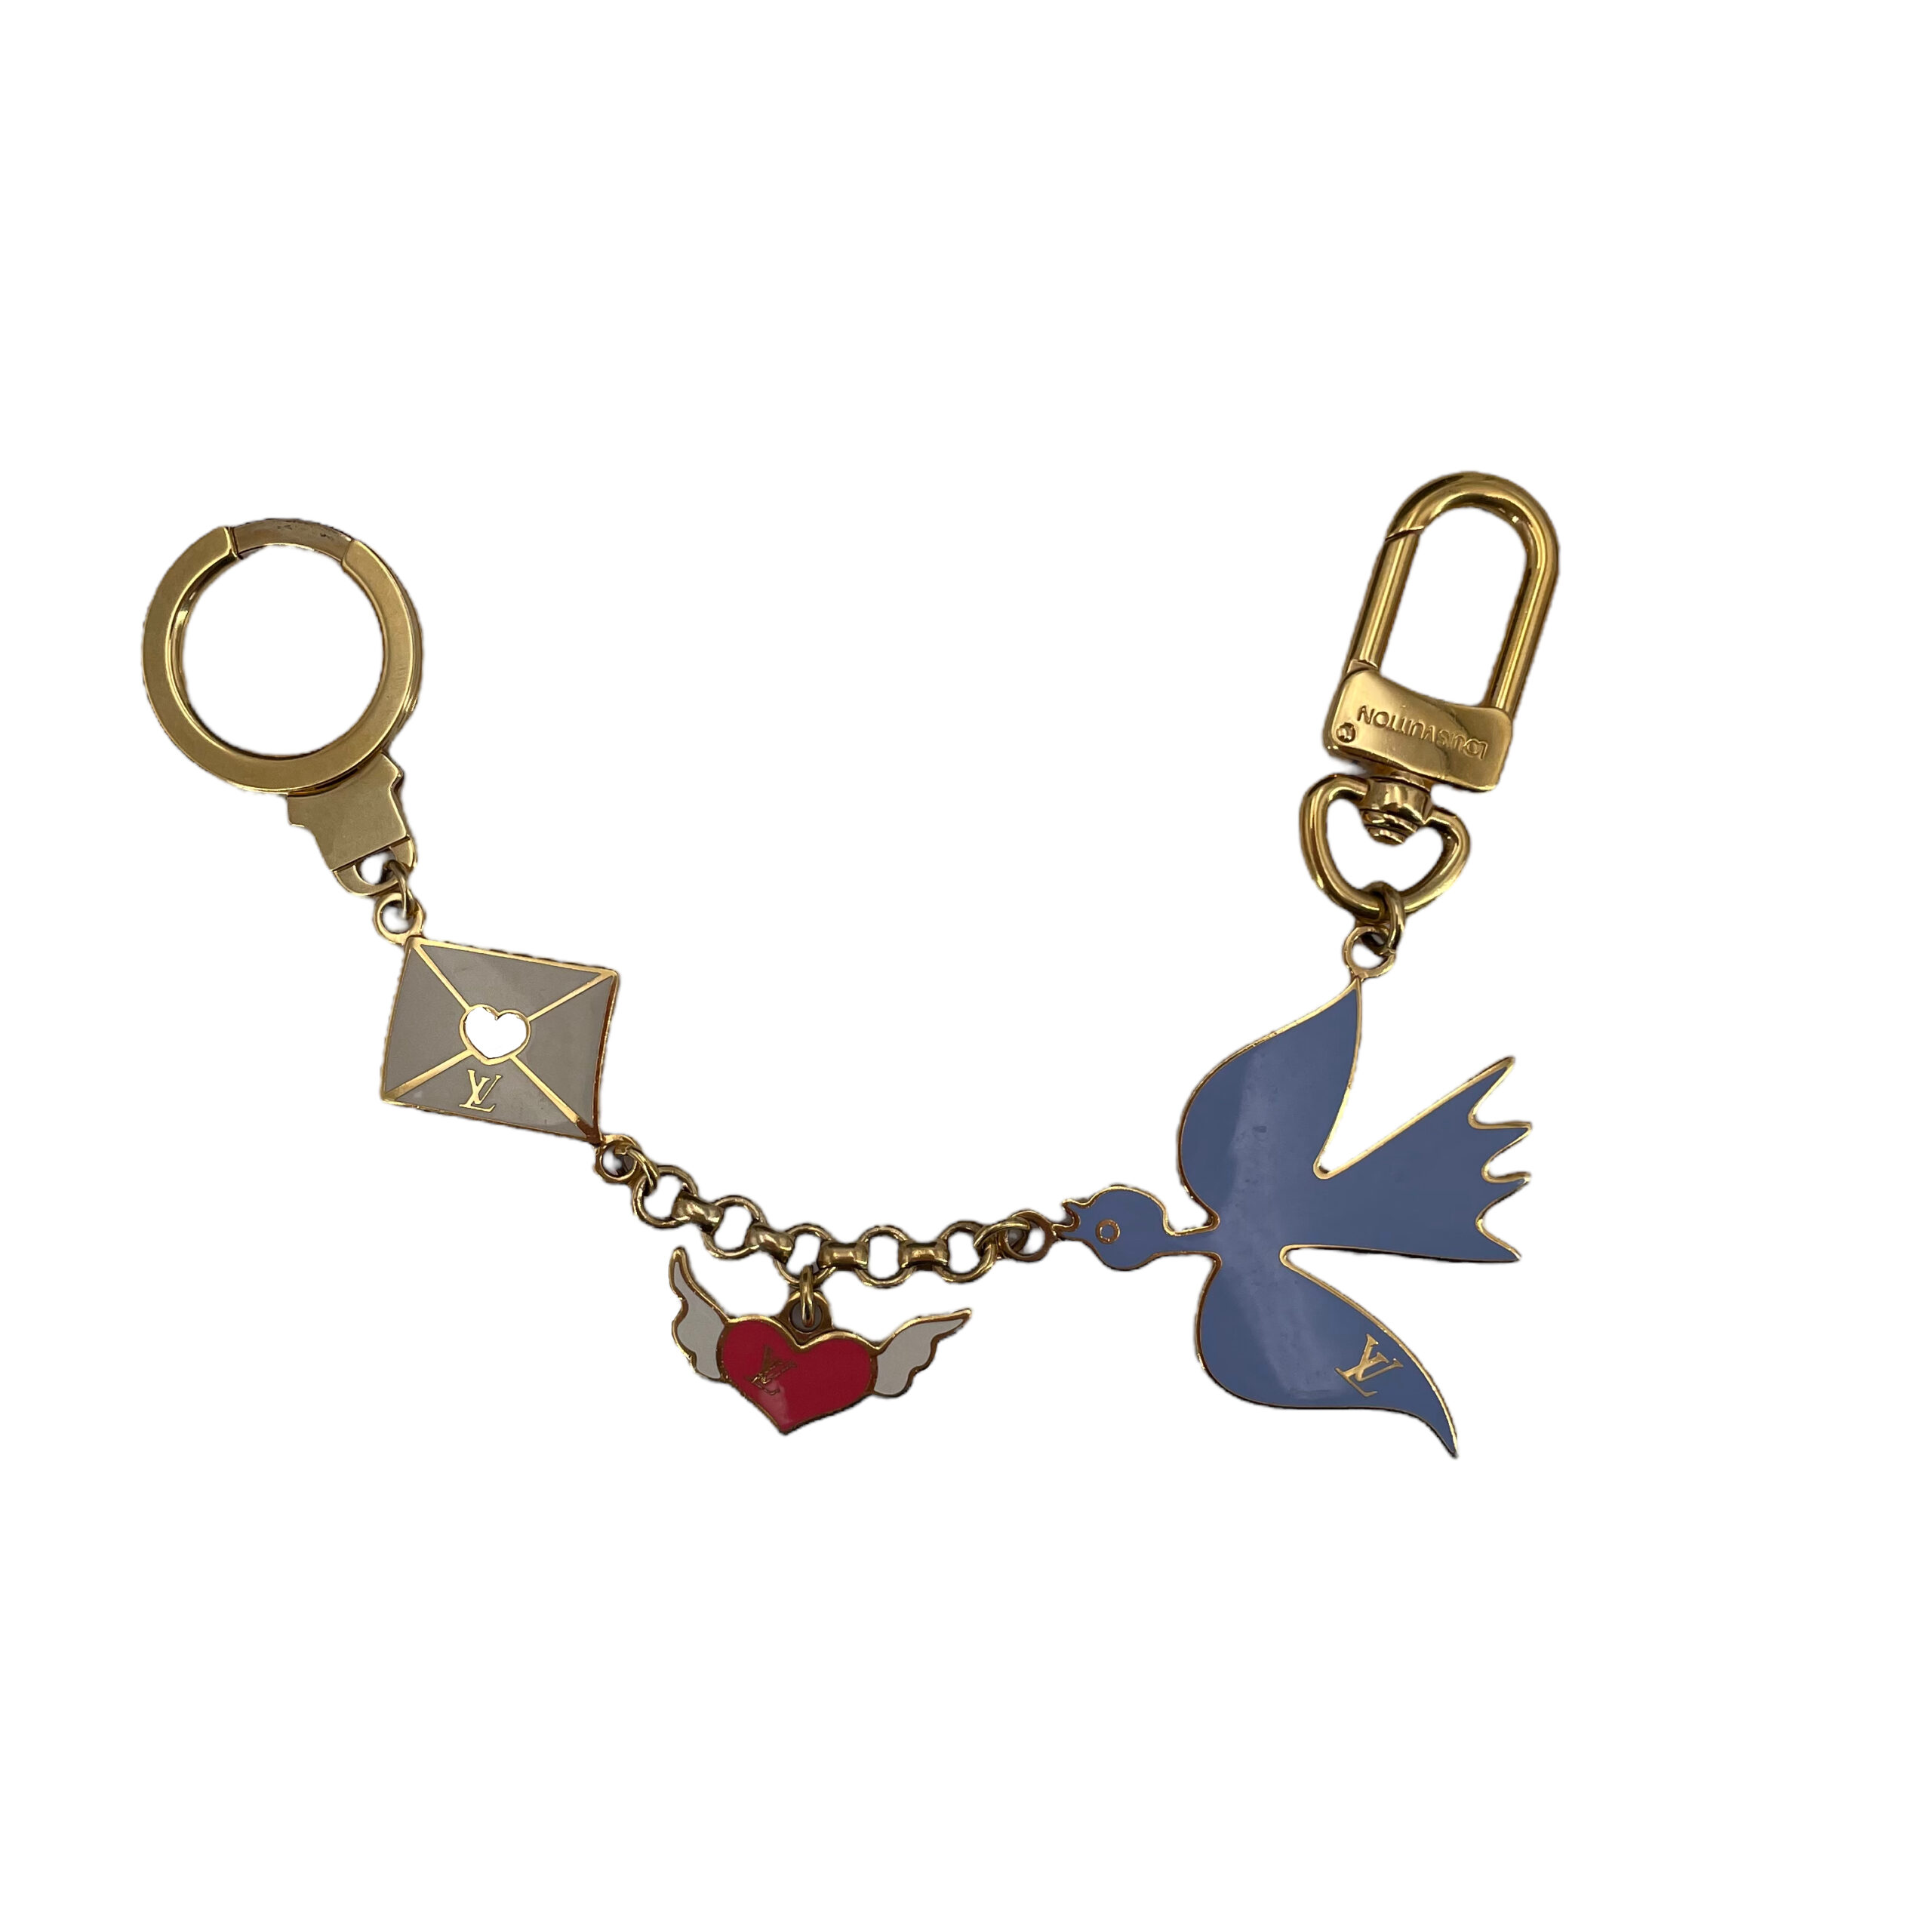 Little Luxuries Designs Louis Vuitton Style Enameled Charms Keychain/Bag Charm